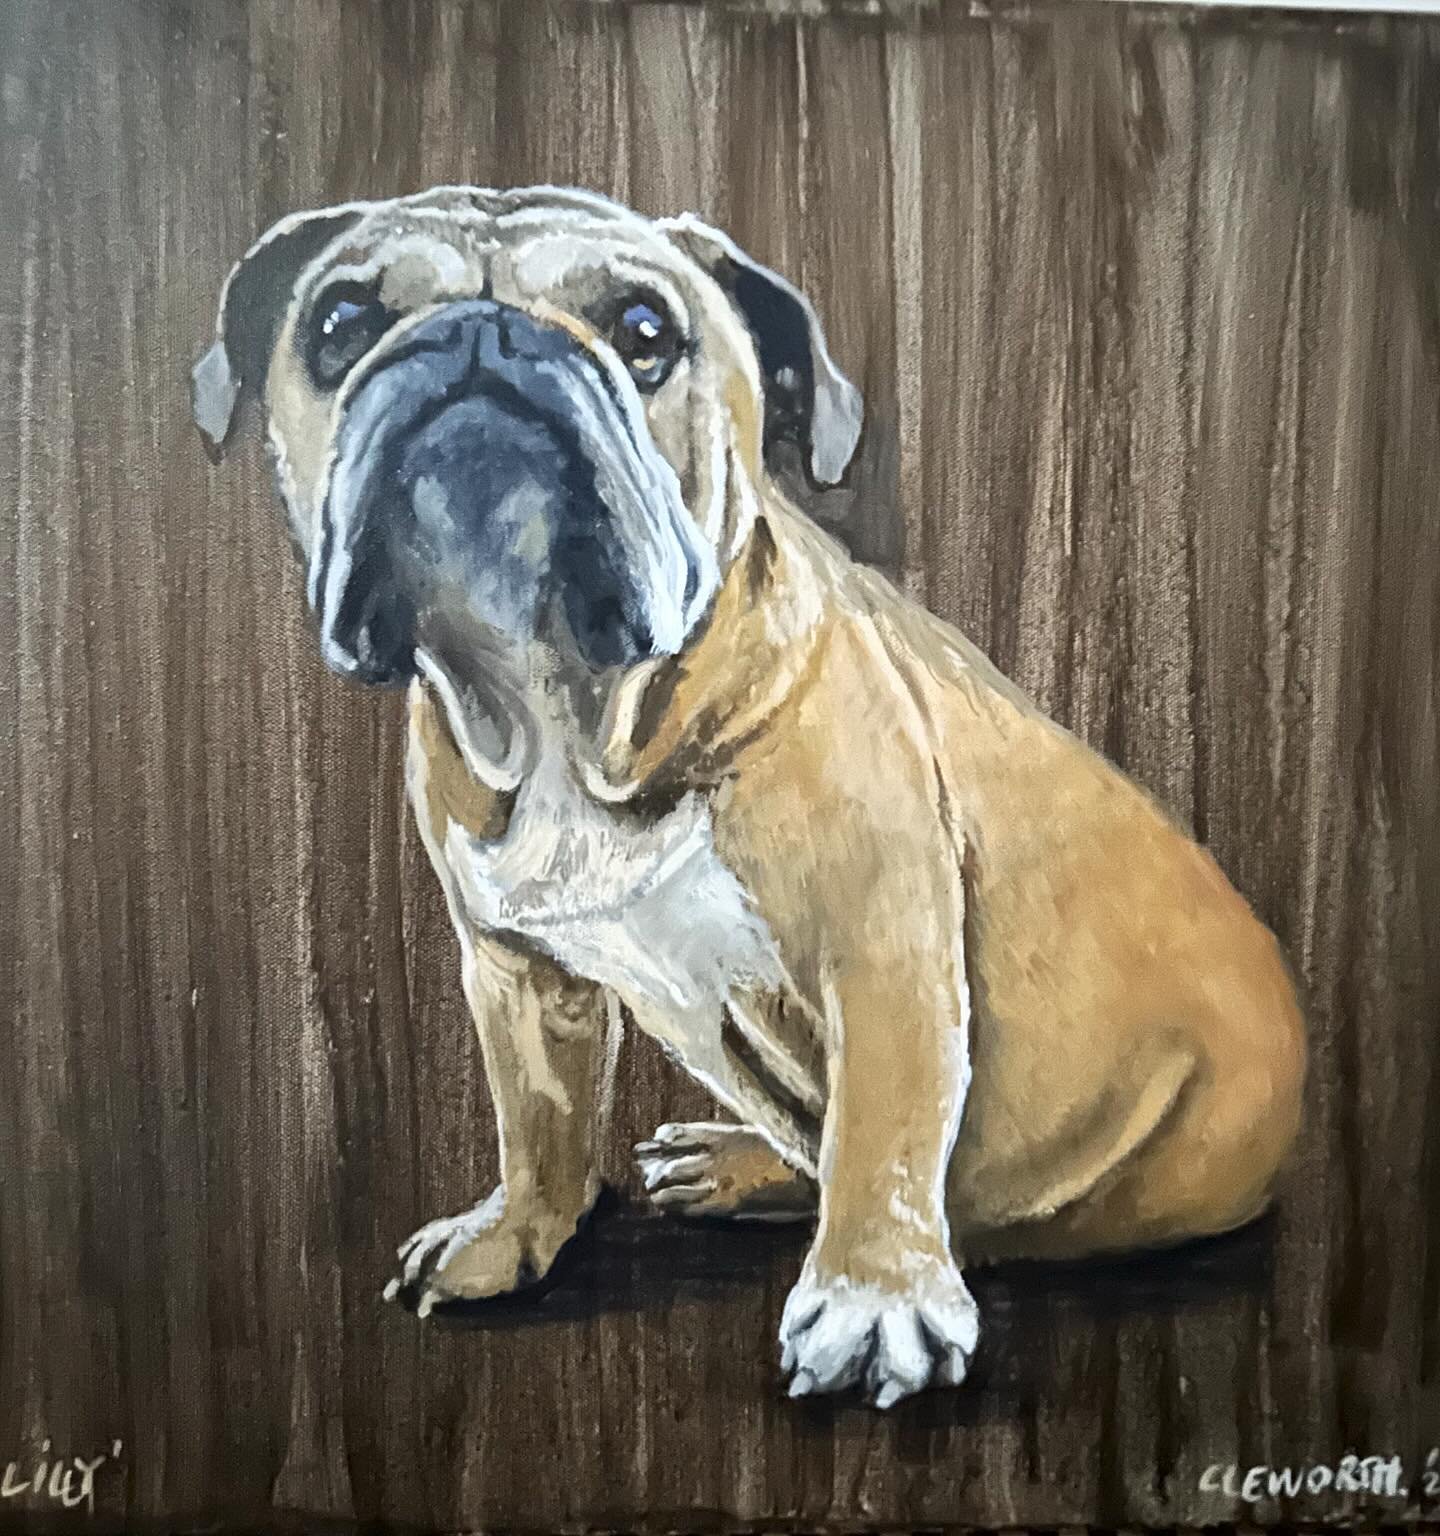 In celebration of #nationalpetday here is a painting I did of my neighbors beautiful pet English Bulldog &ldquo;Lily&rdquo;

Sometimes cars are not the only thing I get commissioned to paint. Let me know what you think. 

Interested in a commission p